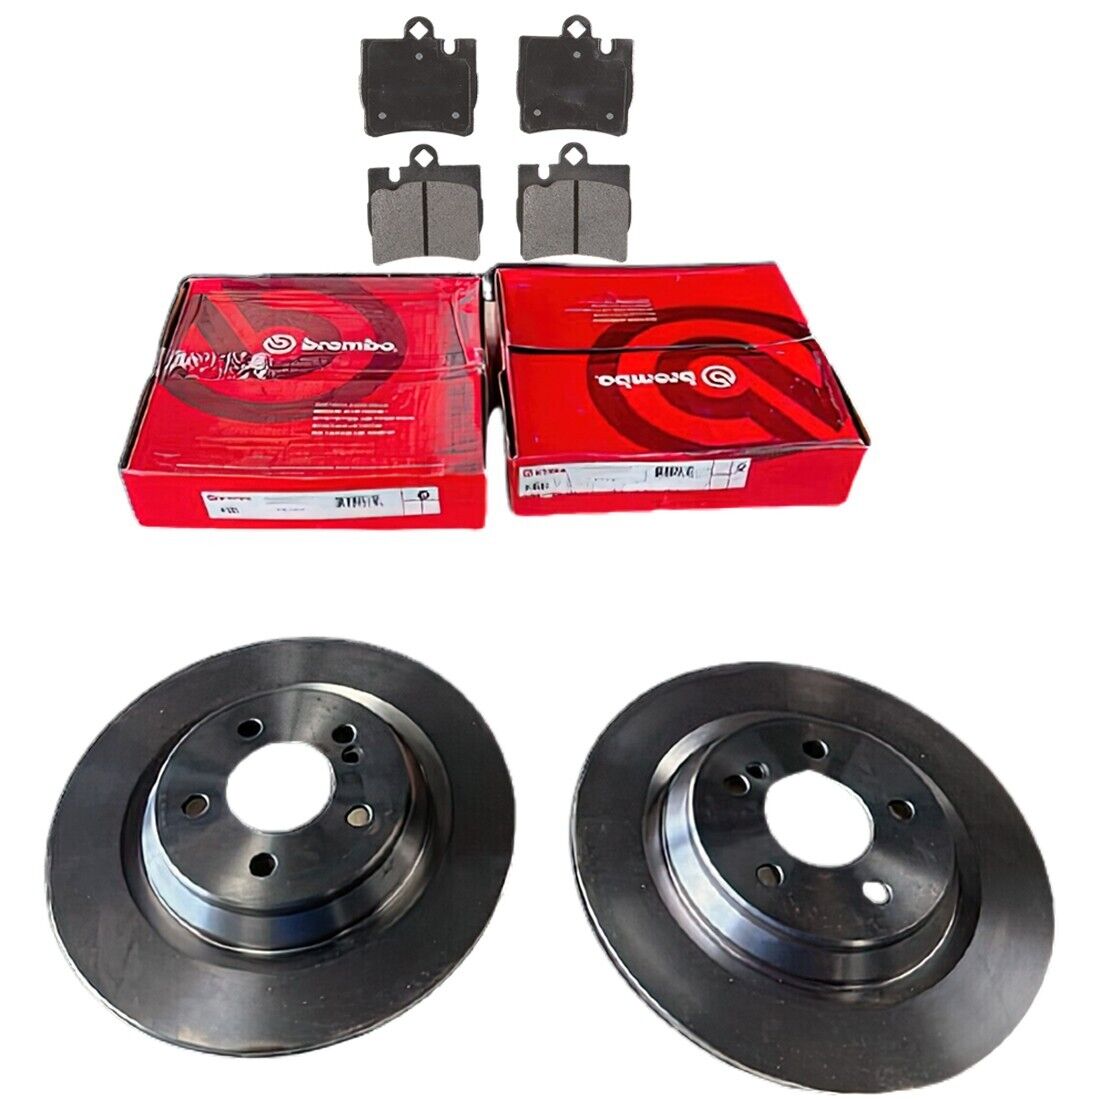 Rear Brembo Disc Brake Rotors & Pads For Mercedes-Benz S600, S55-CL55 AMG; 315mm